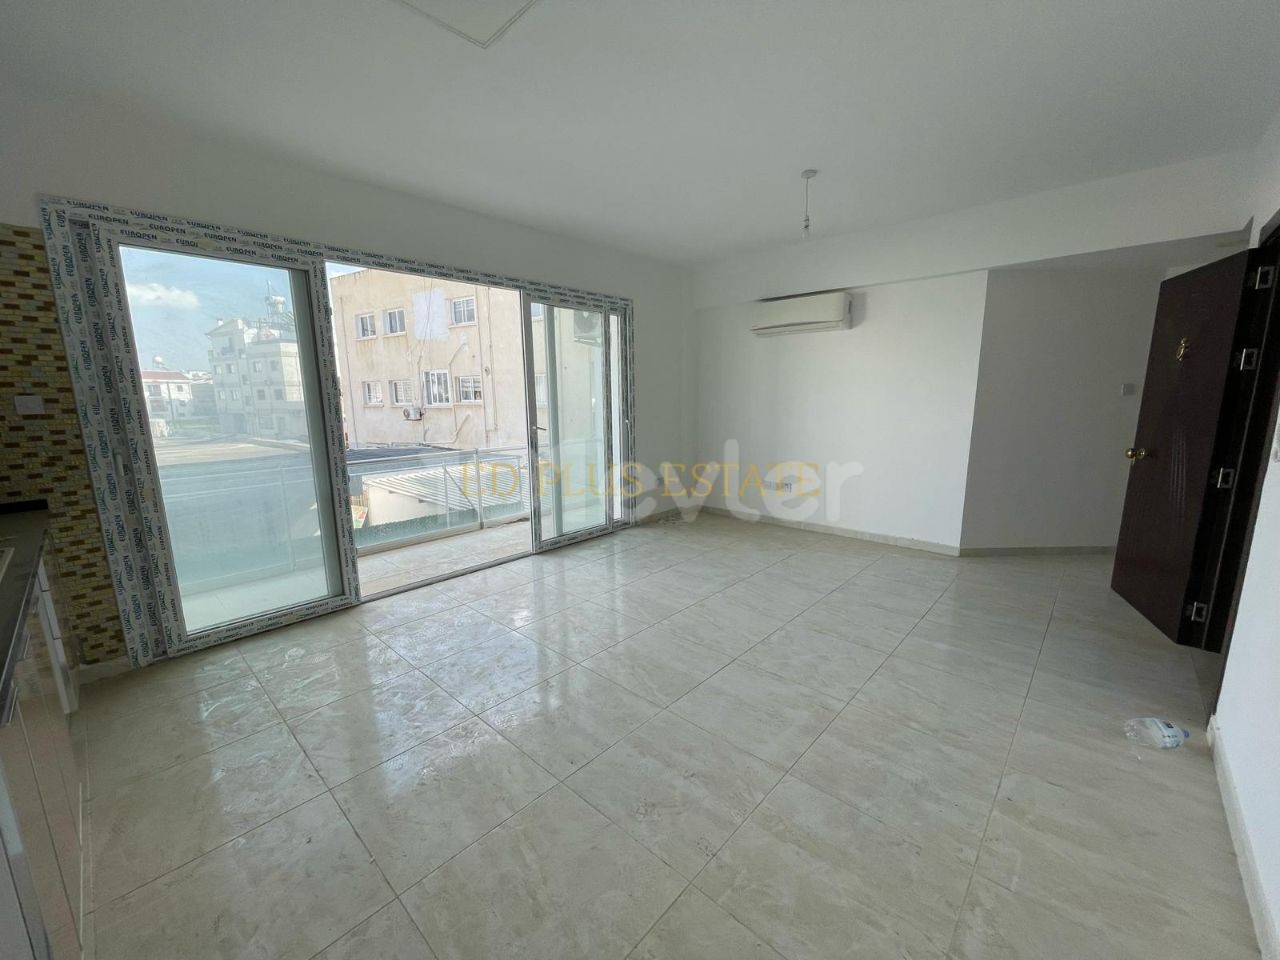 Unfurnished 2+1 Flat with Air Conditioning Next to Nicosia Gönyeli Underpass